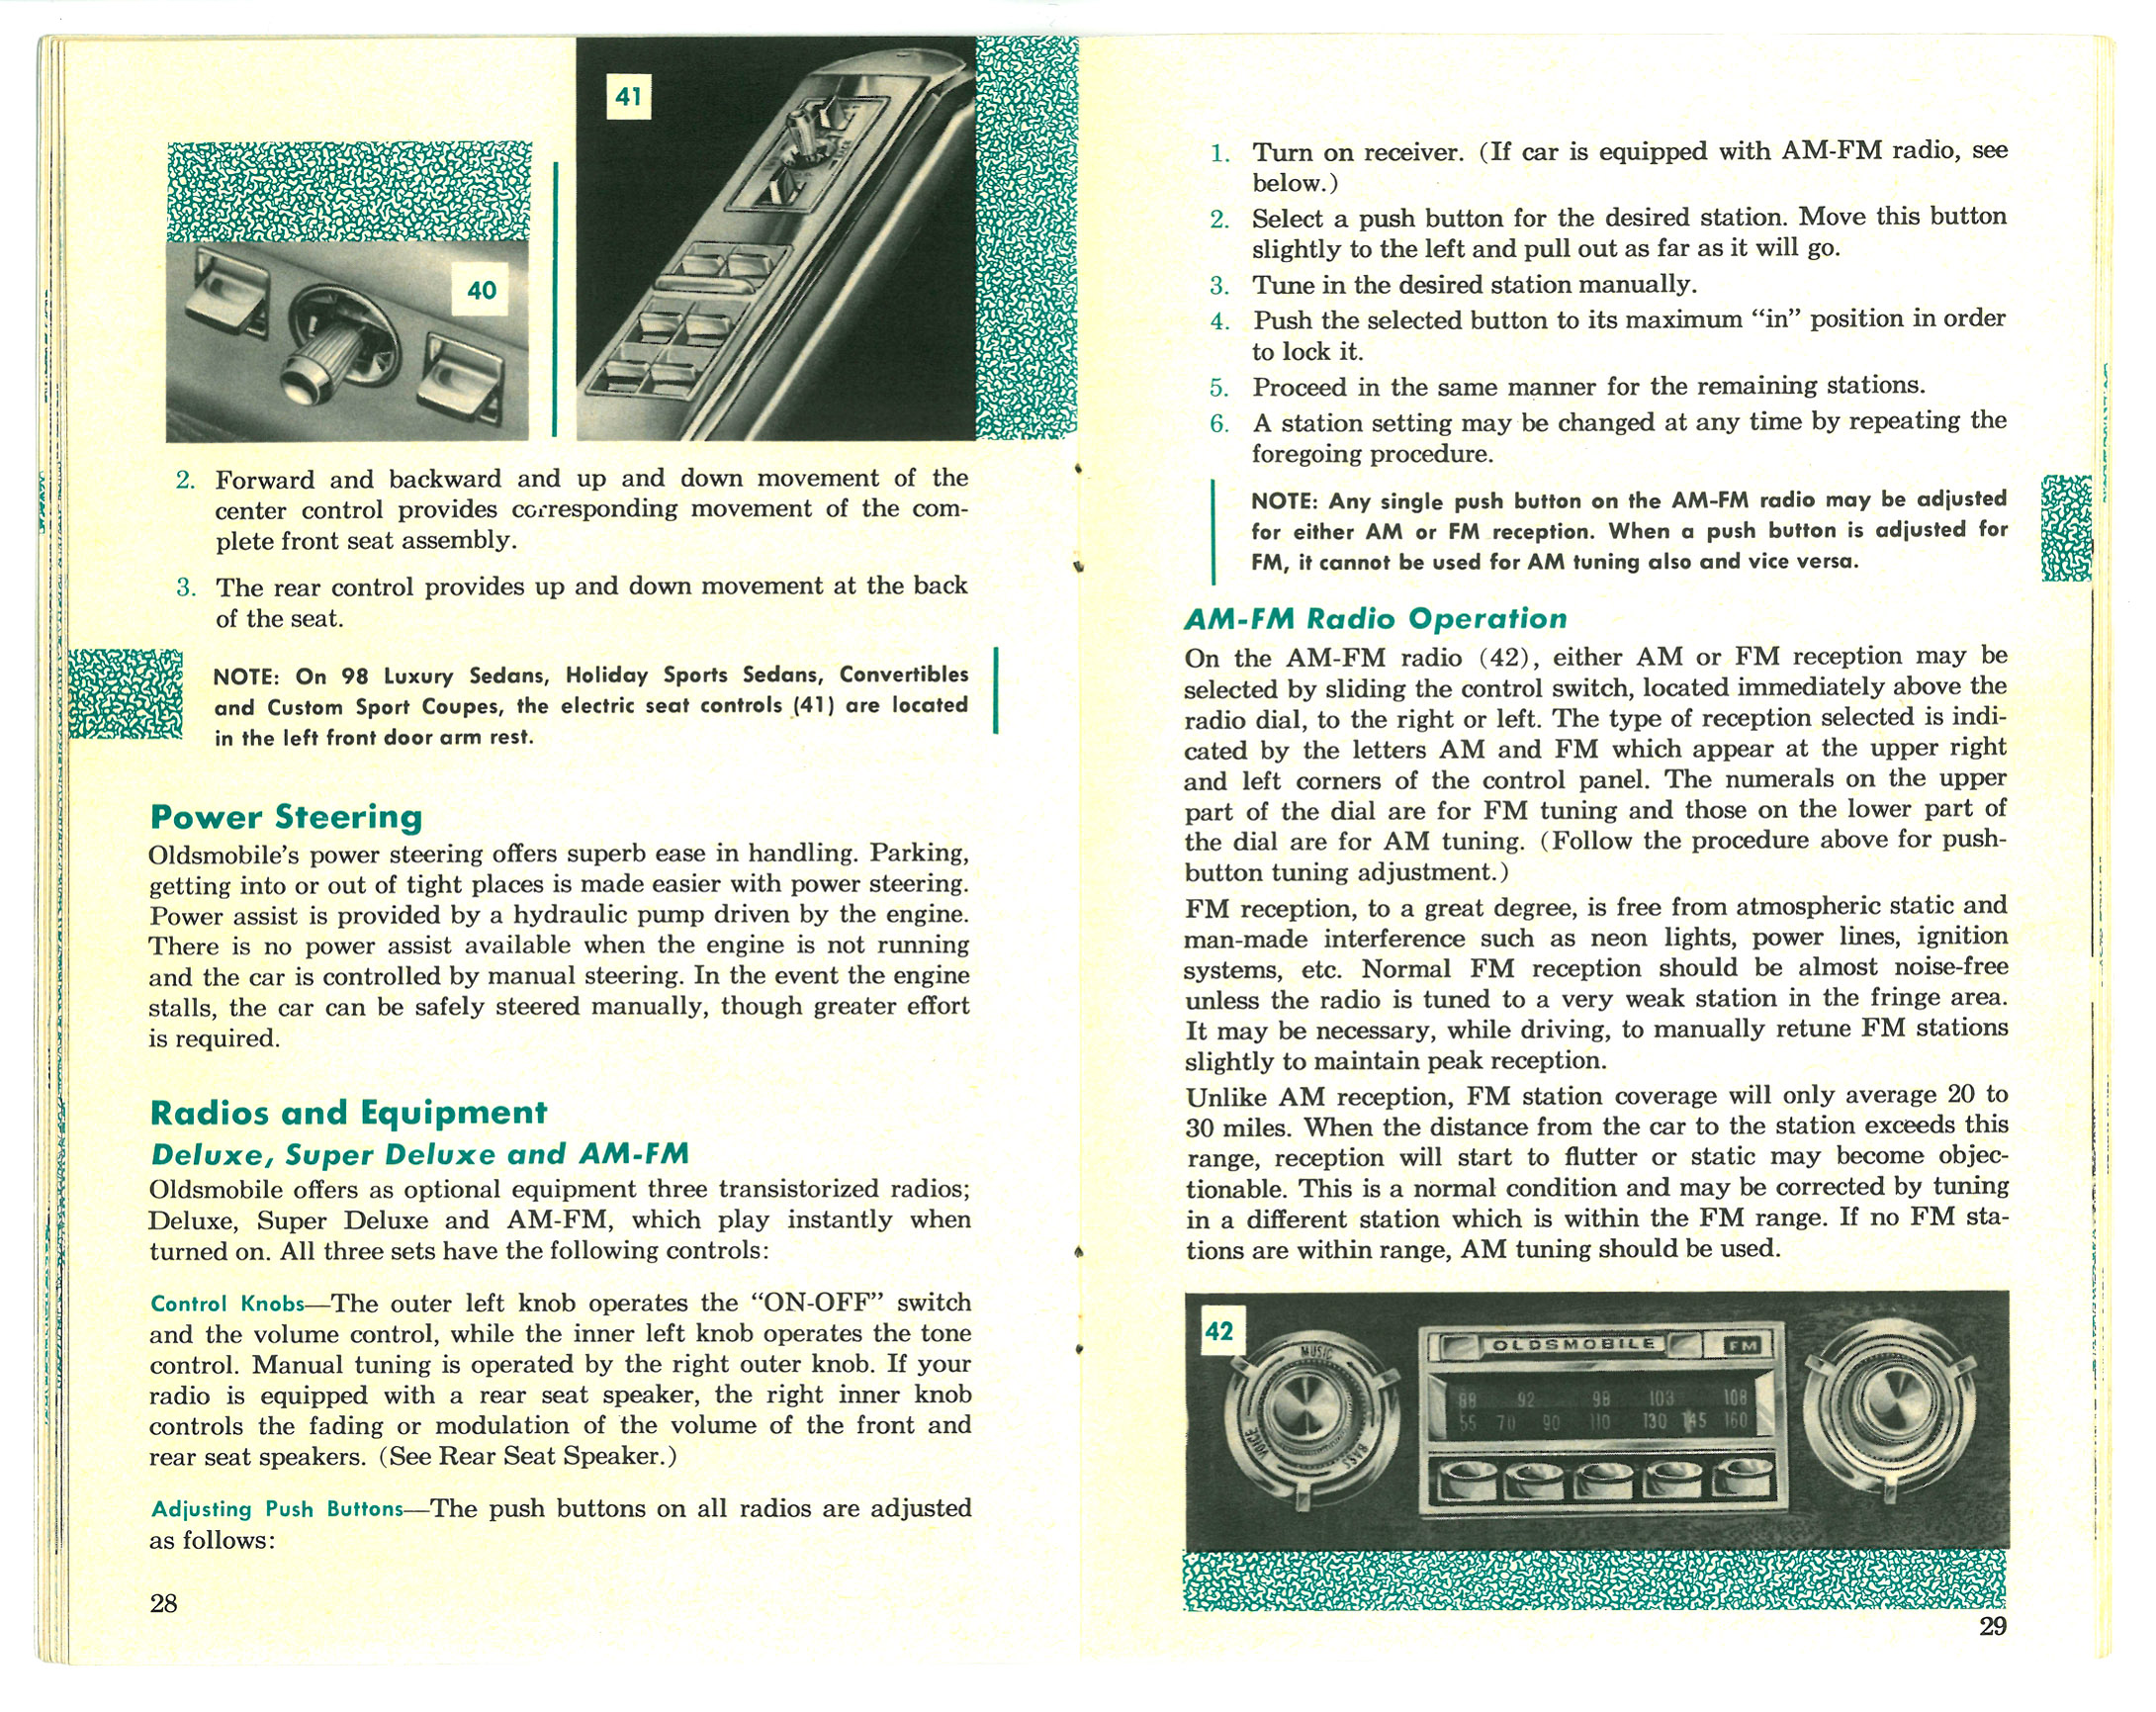 1966_Oldsmobile_owner_operating_manual_Page_16